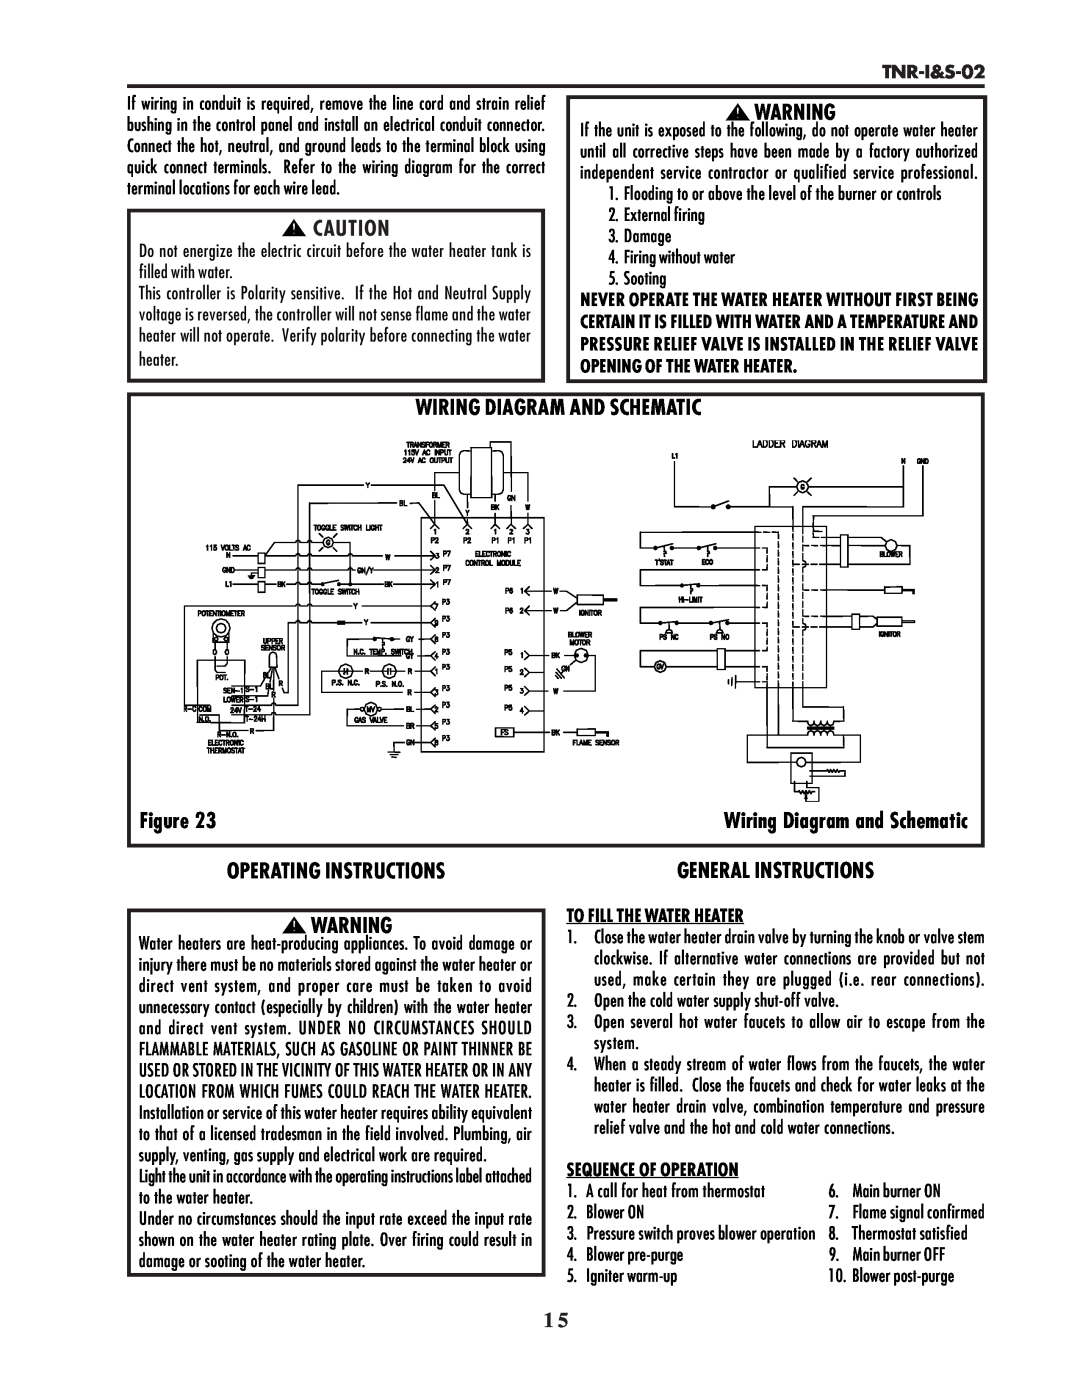 Lochinvar TNR-I&S-02 Wiring Diagram And Schematic, Operating Instructions, General Instructions, To Fill The Water Heater 